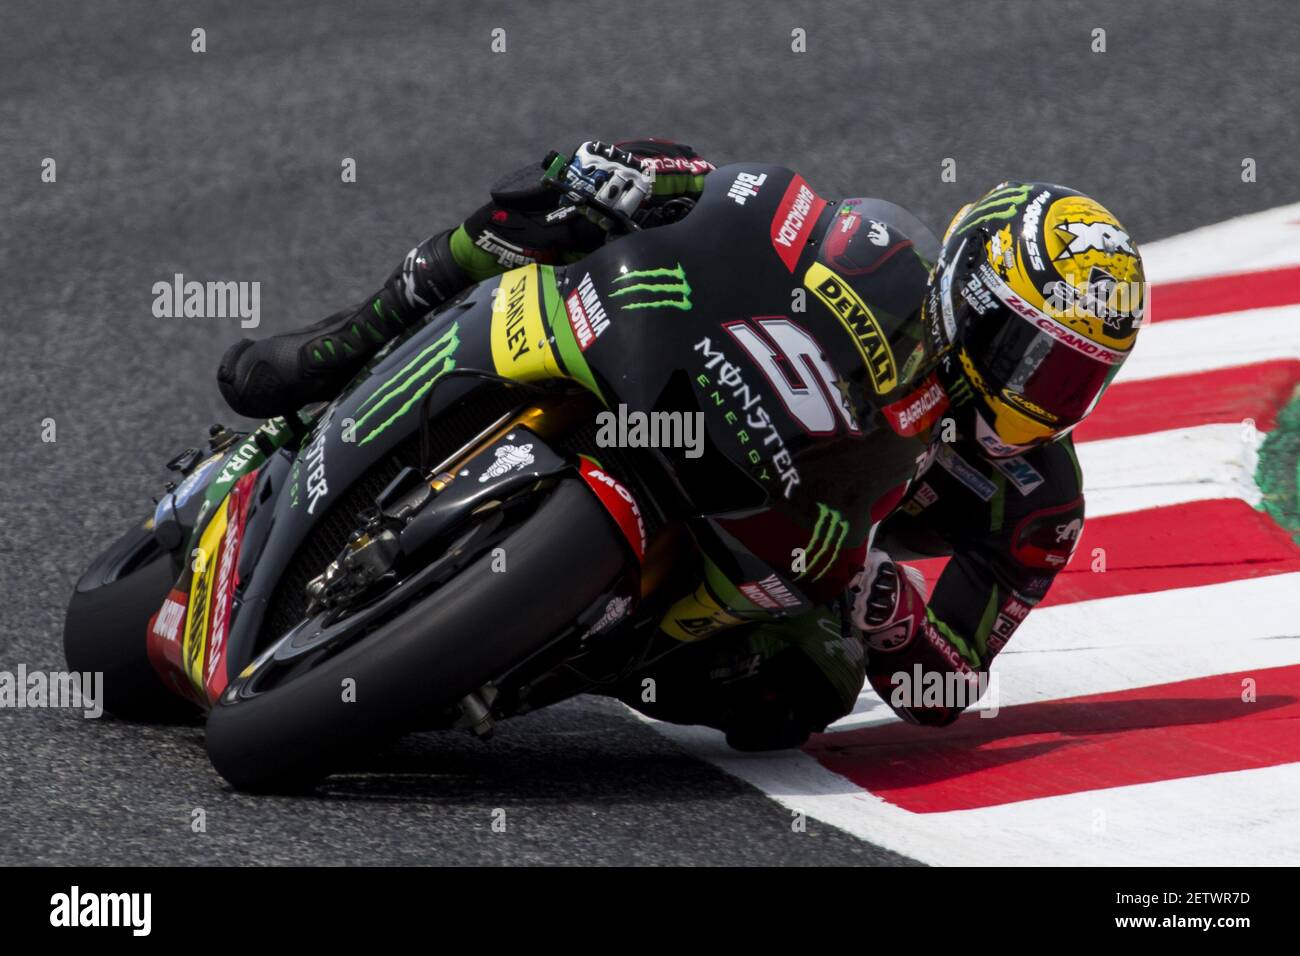 Johann Zarco of France and Monster Yamaha Tech 3 Team rides during free  practice for the MotoGP of Catalunya at Circuit de Catalunya on June 9, 2017  in Montmelo, Spain.(Photo by Rodrigo